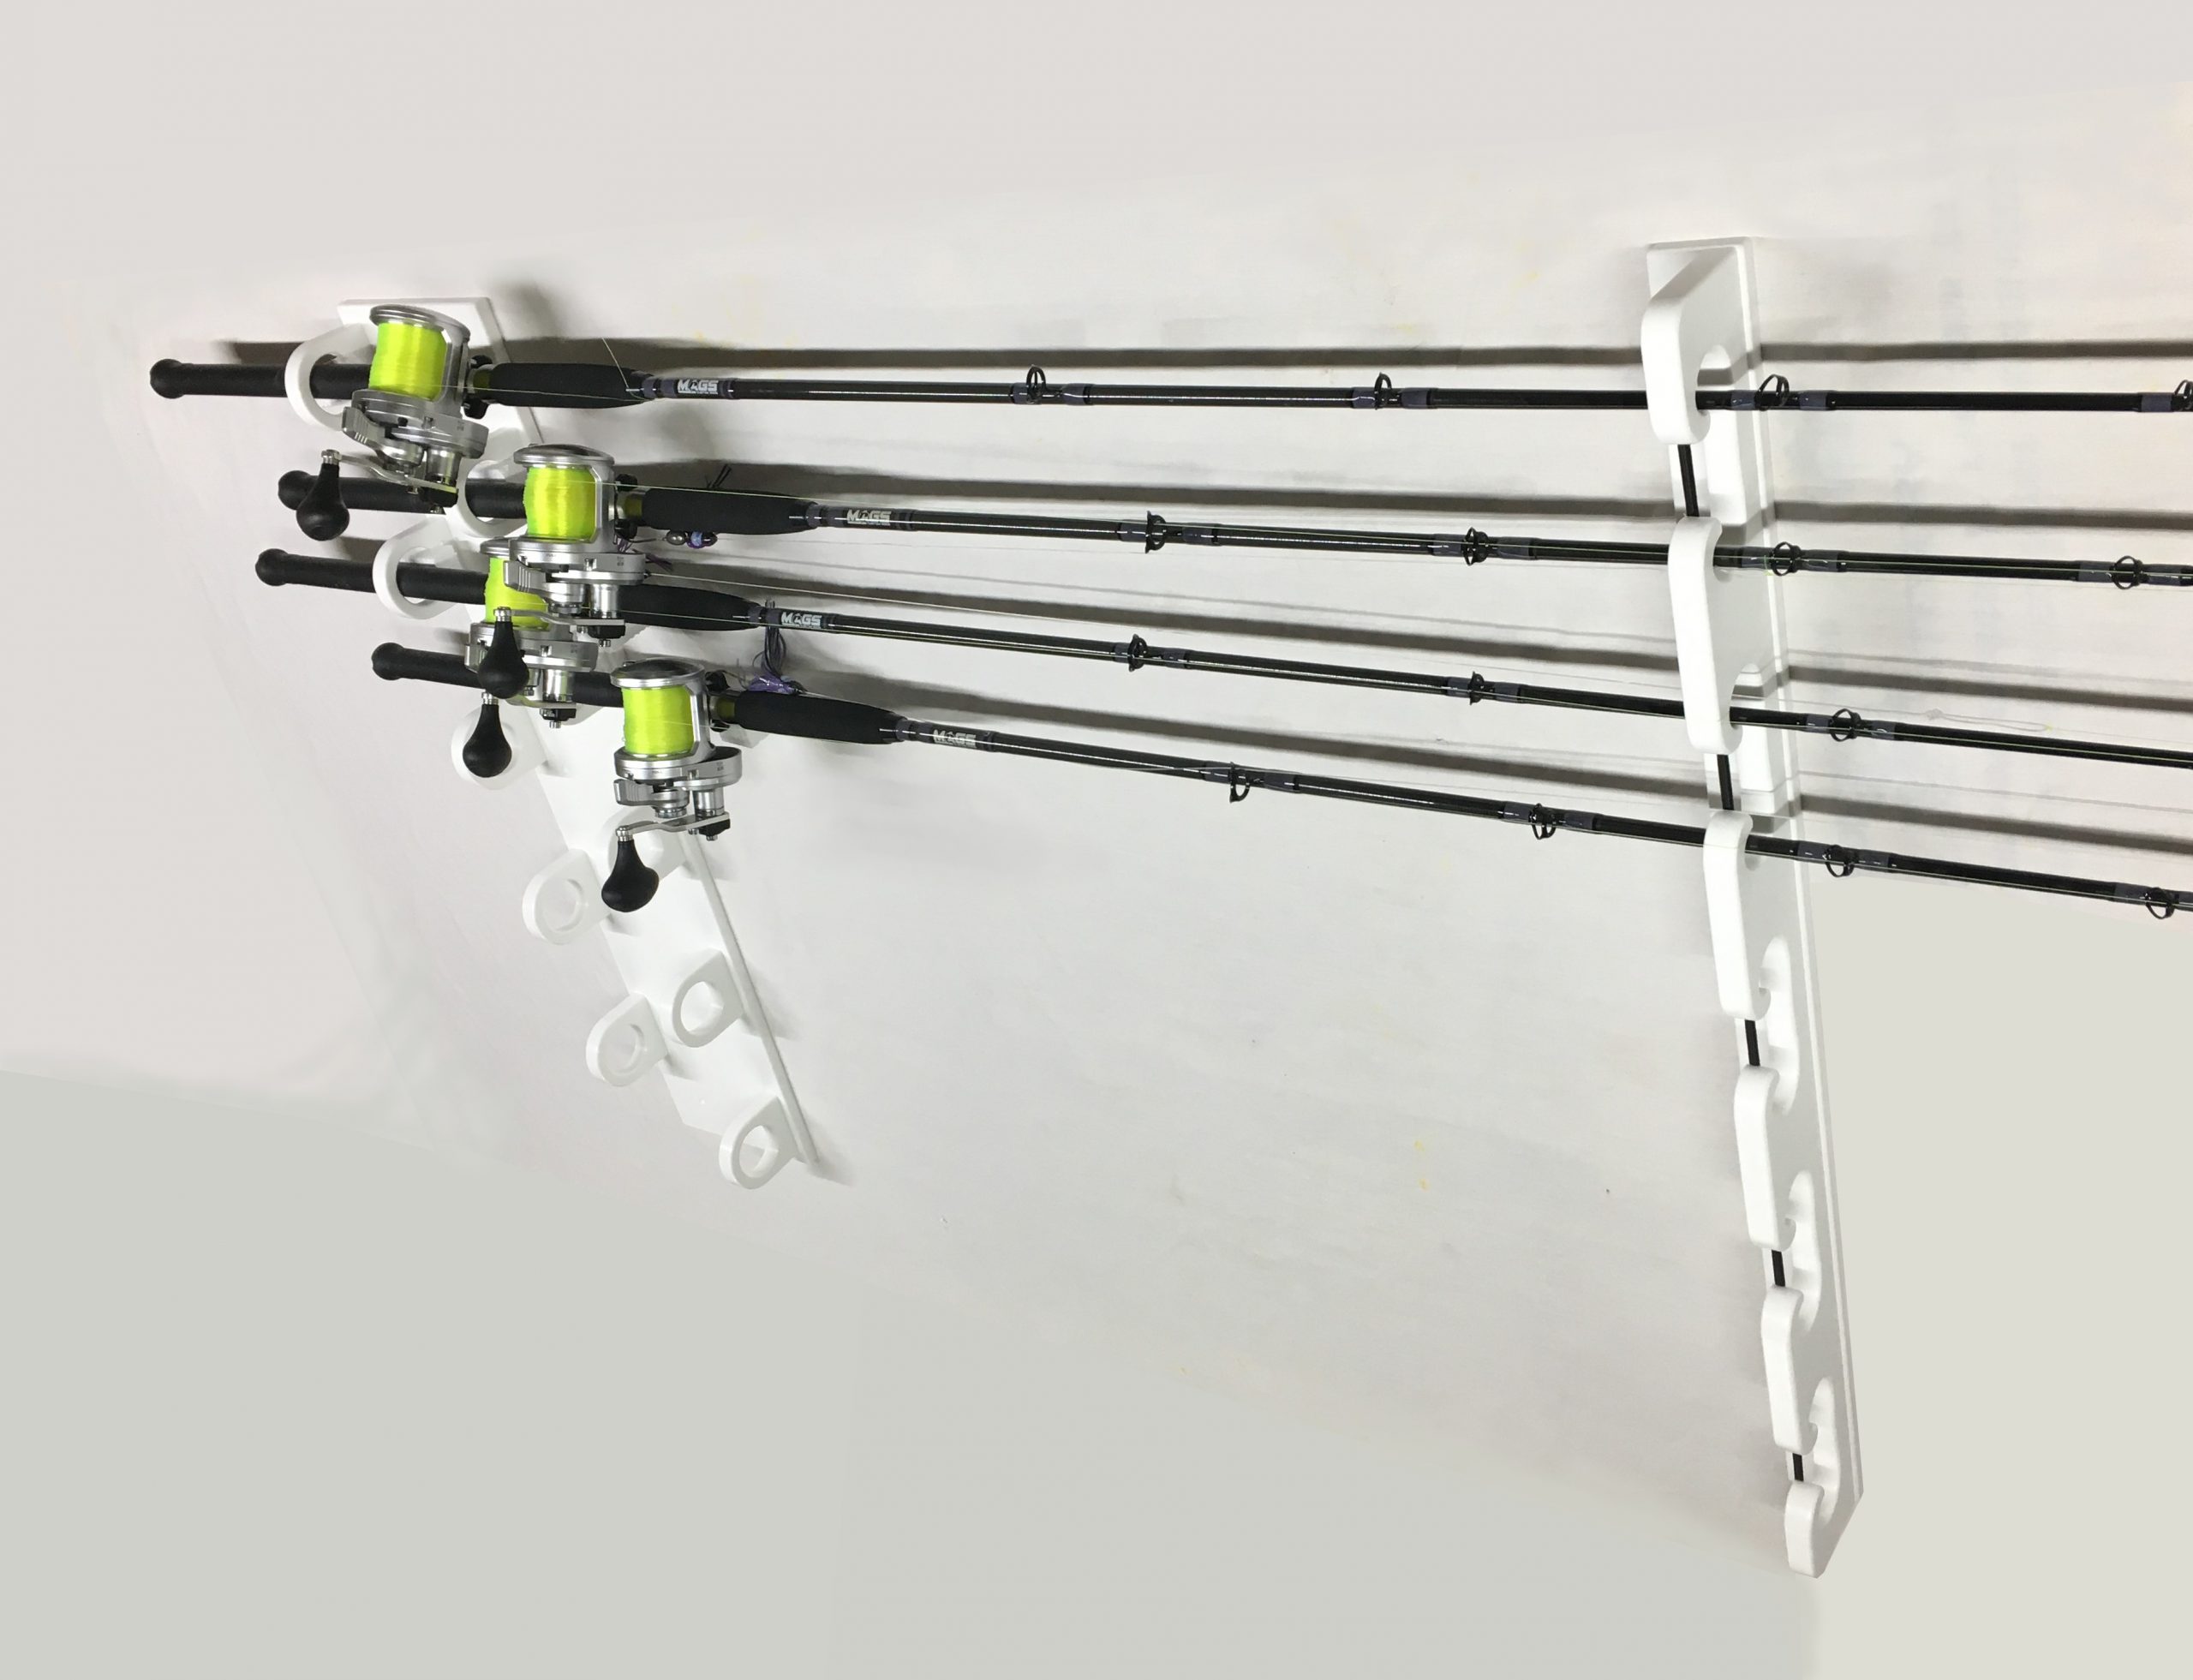 Ceiling Mount Big Game Rod Holder For 10 Fishing Rods and Reels